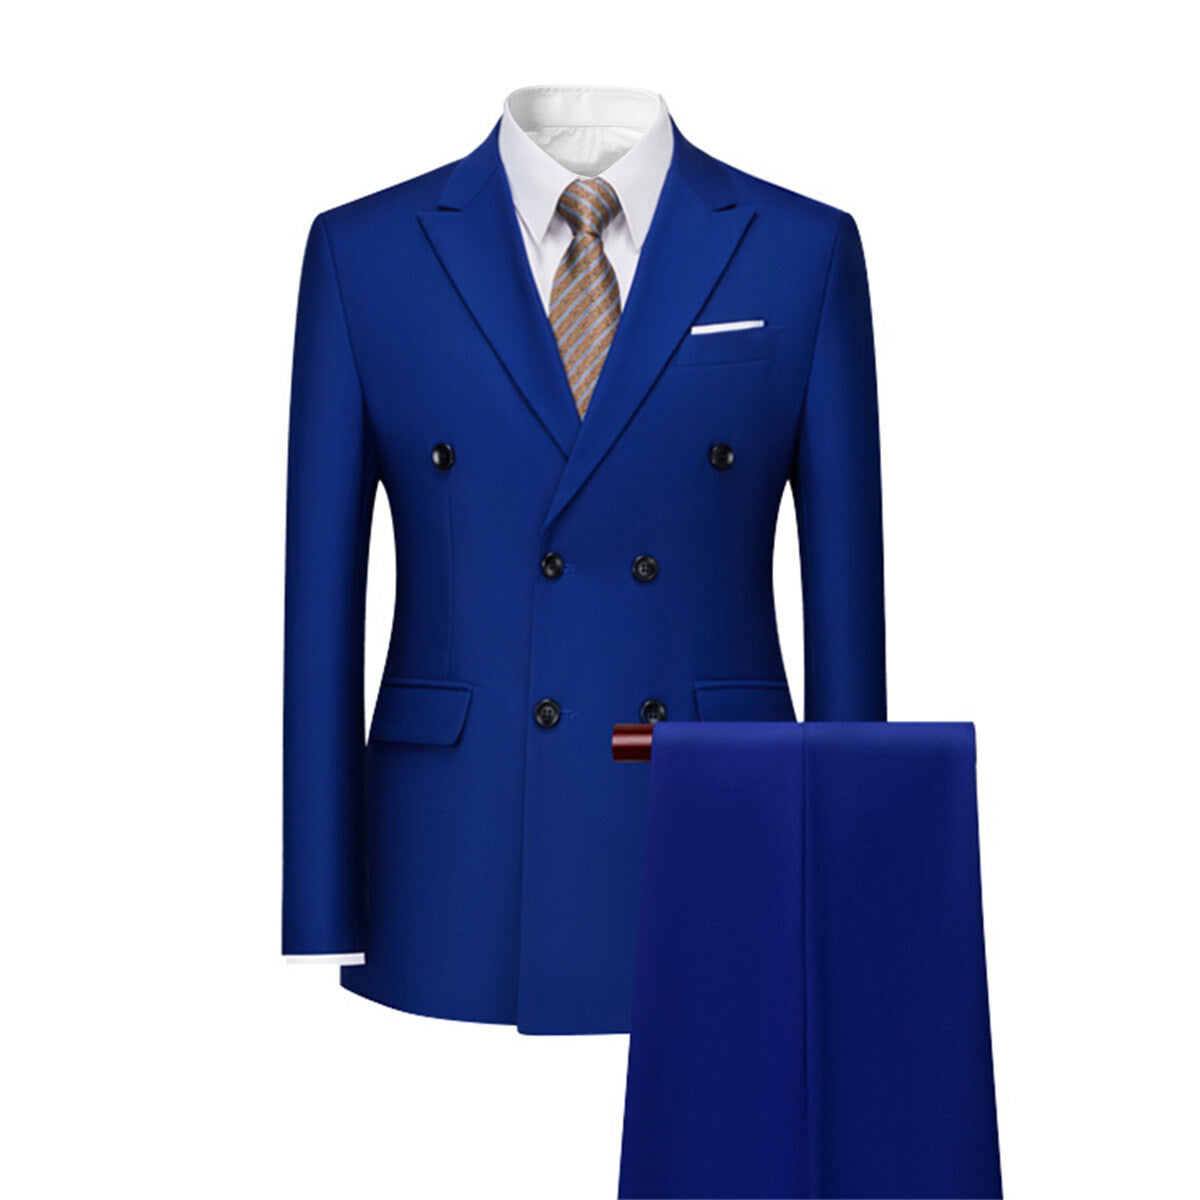 Men's Solid Color Double Breasted Business Suit Blue